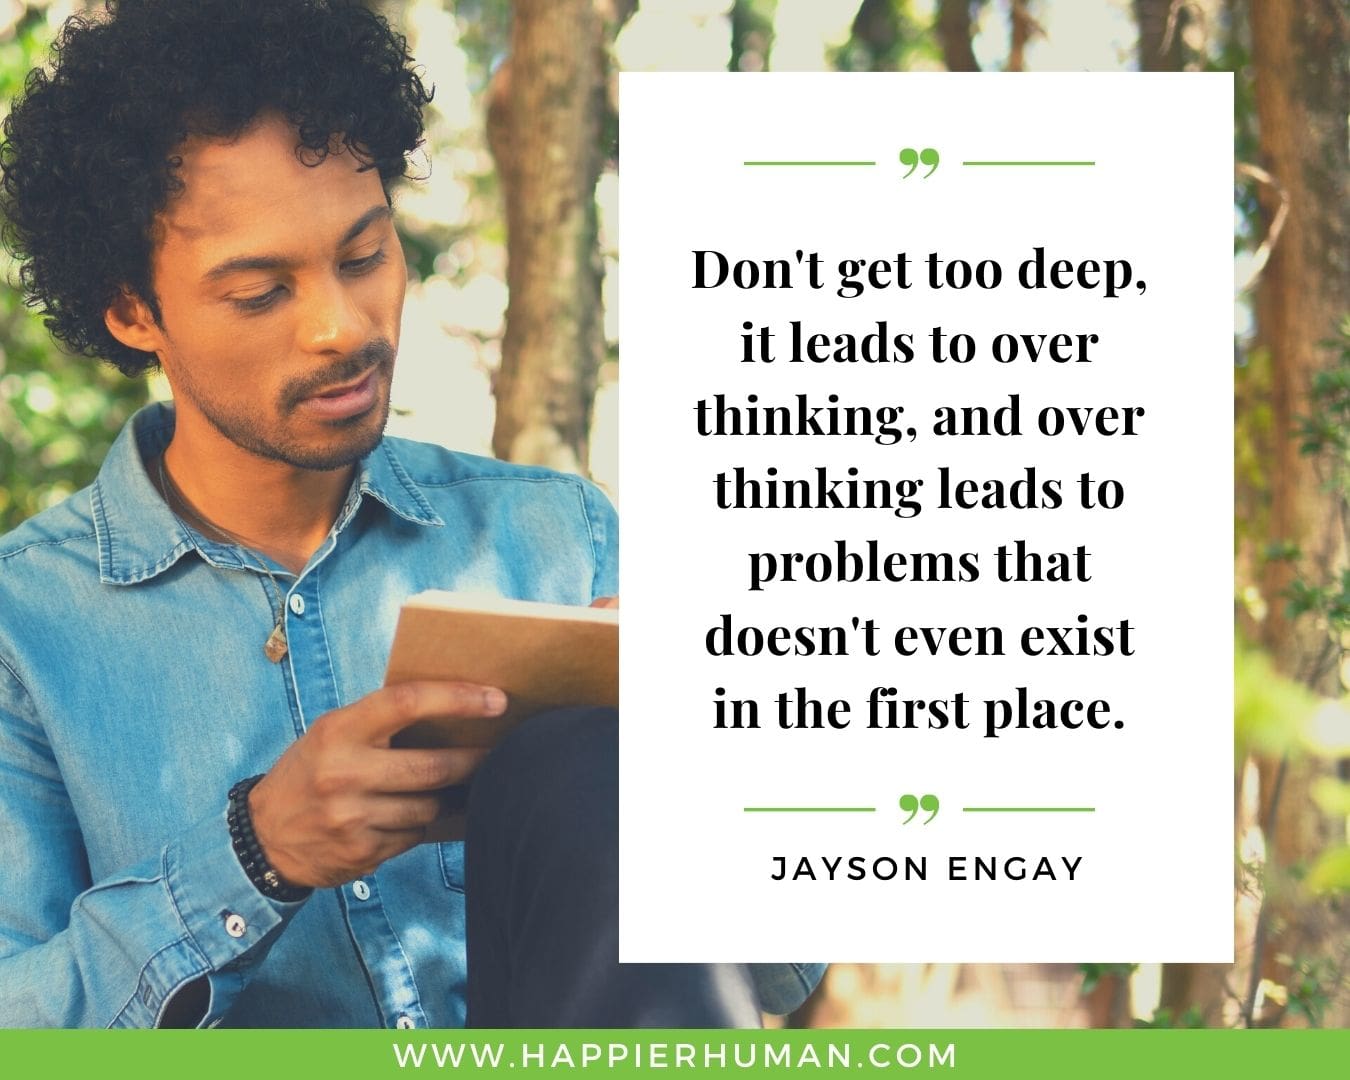 Overthinking Quotes - “Don't get too deep, it leads to over thinking, and over thinking leads to problems that doesn't even exist in the first place.” - Jayson Engay